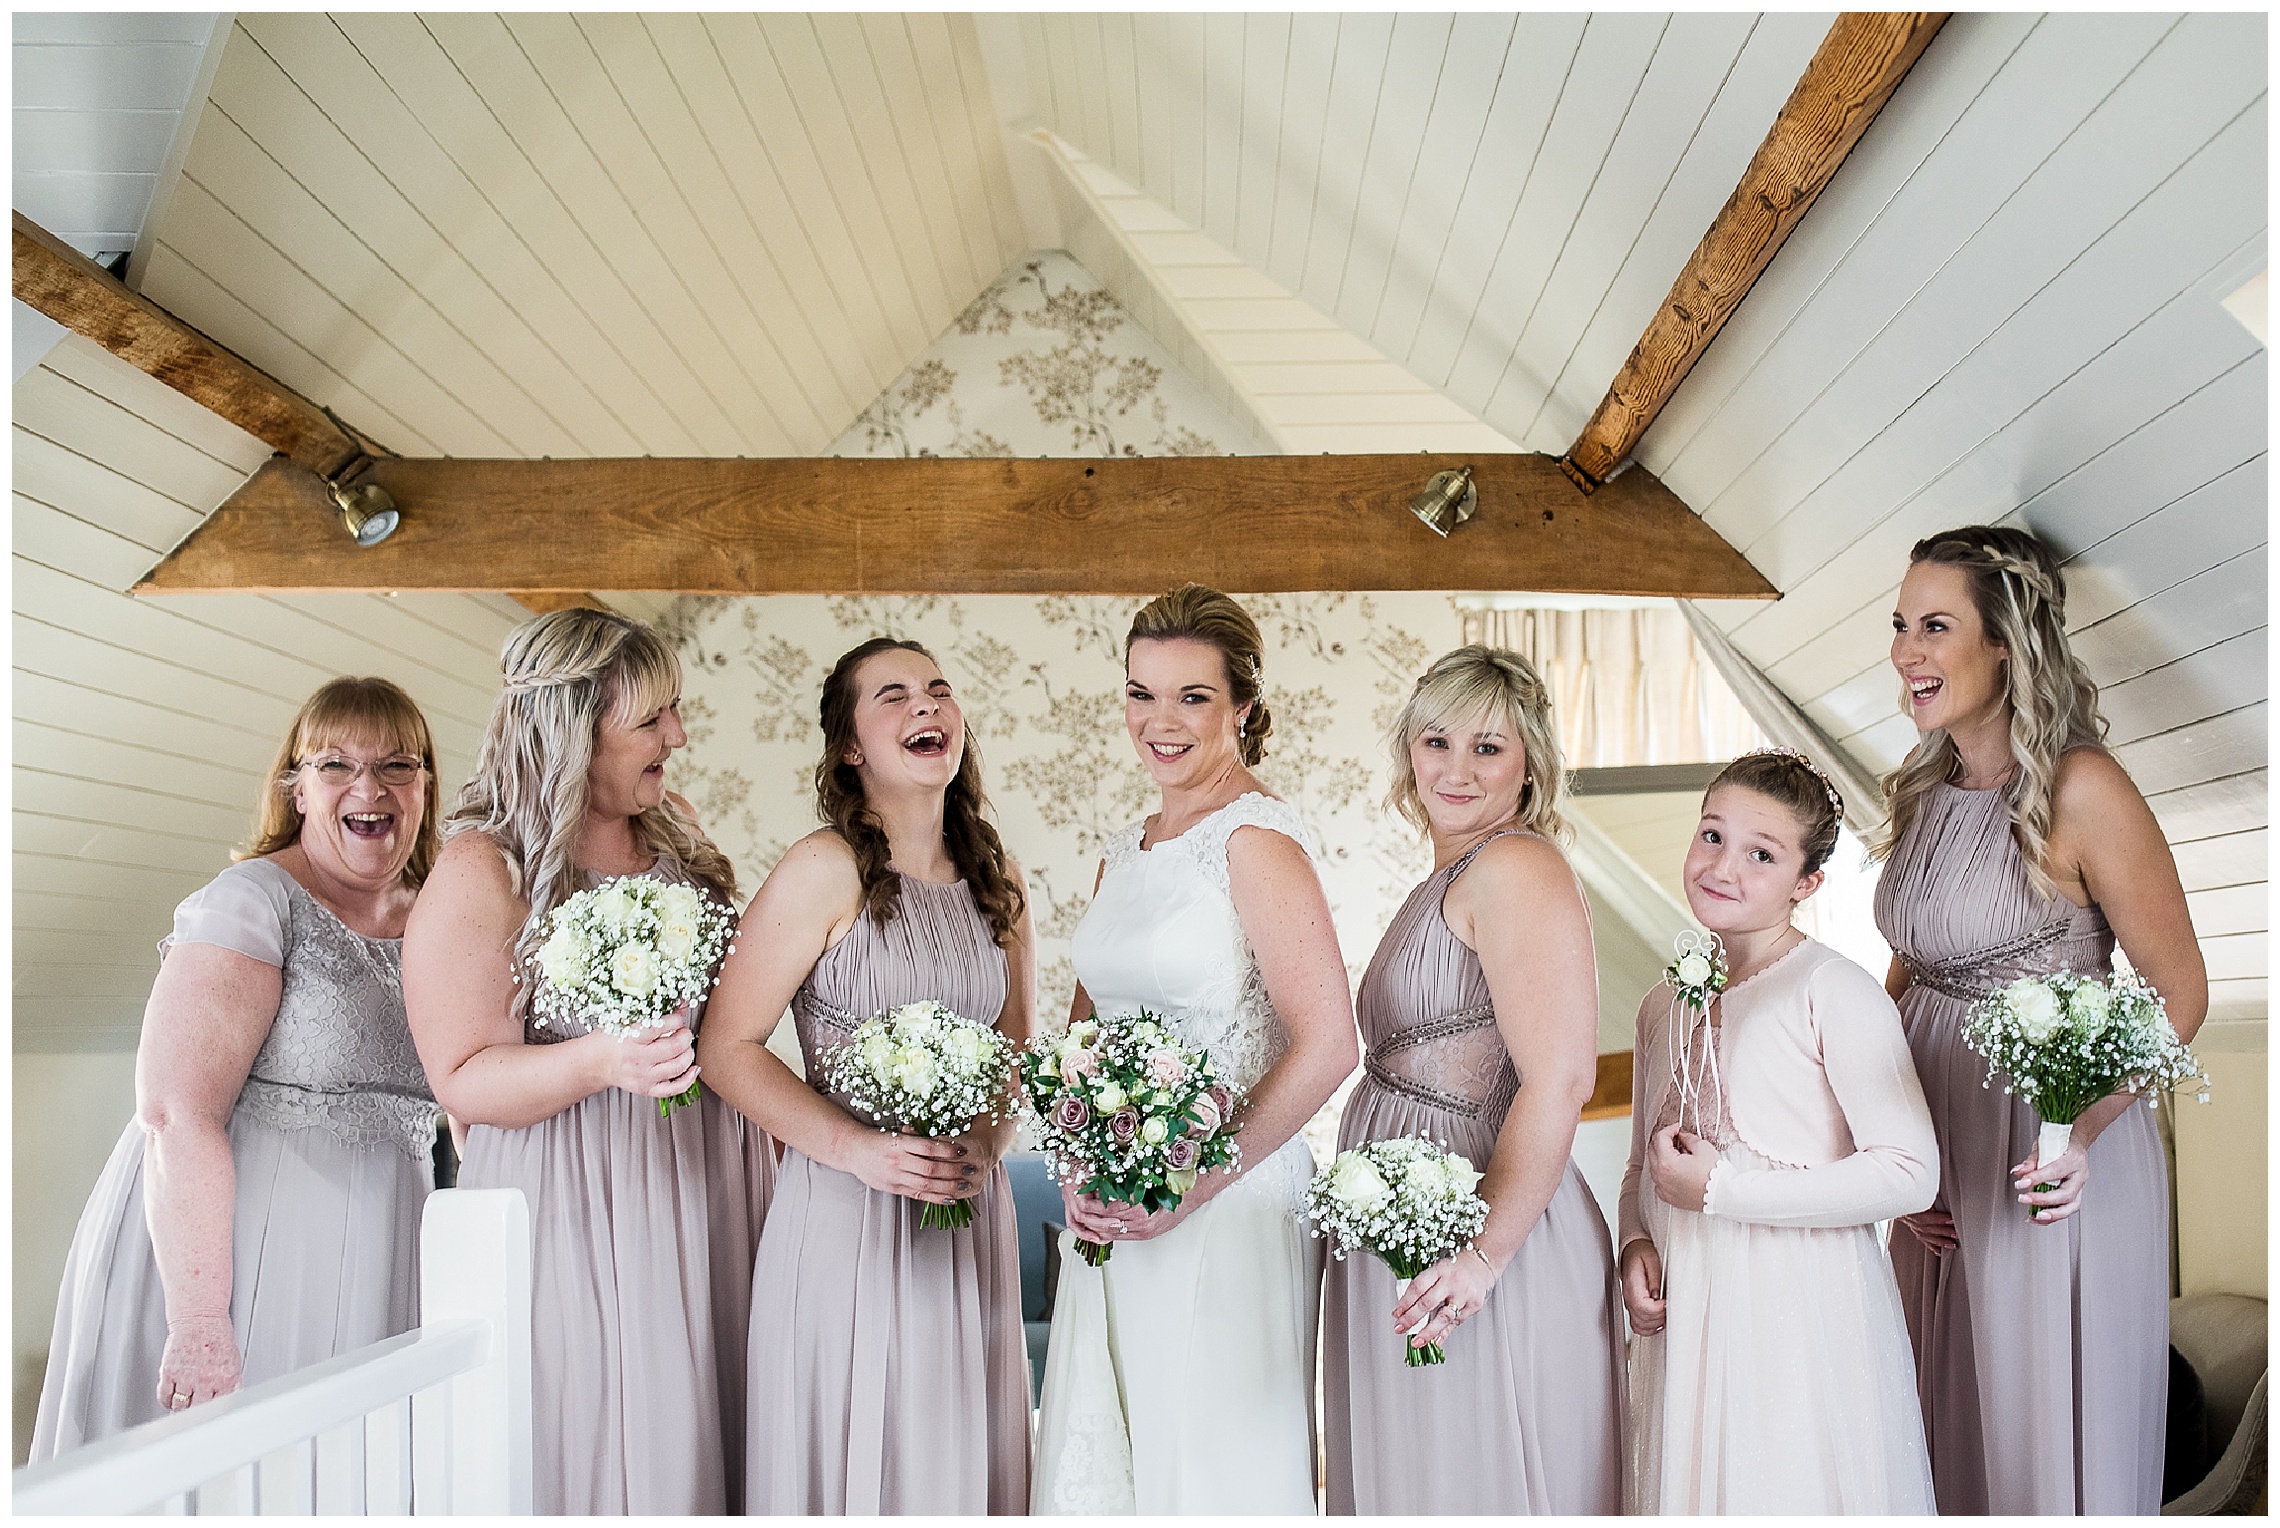 Bride and bridesmaids in lilac dresses holding flowers and smiling